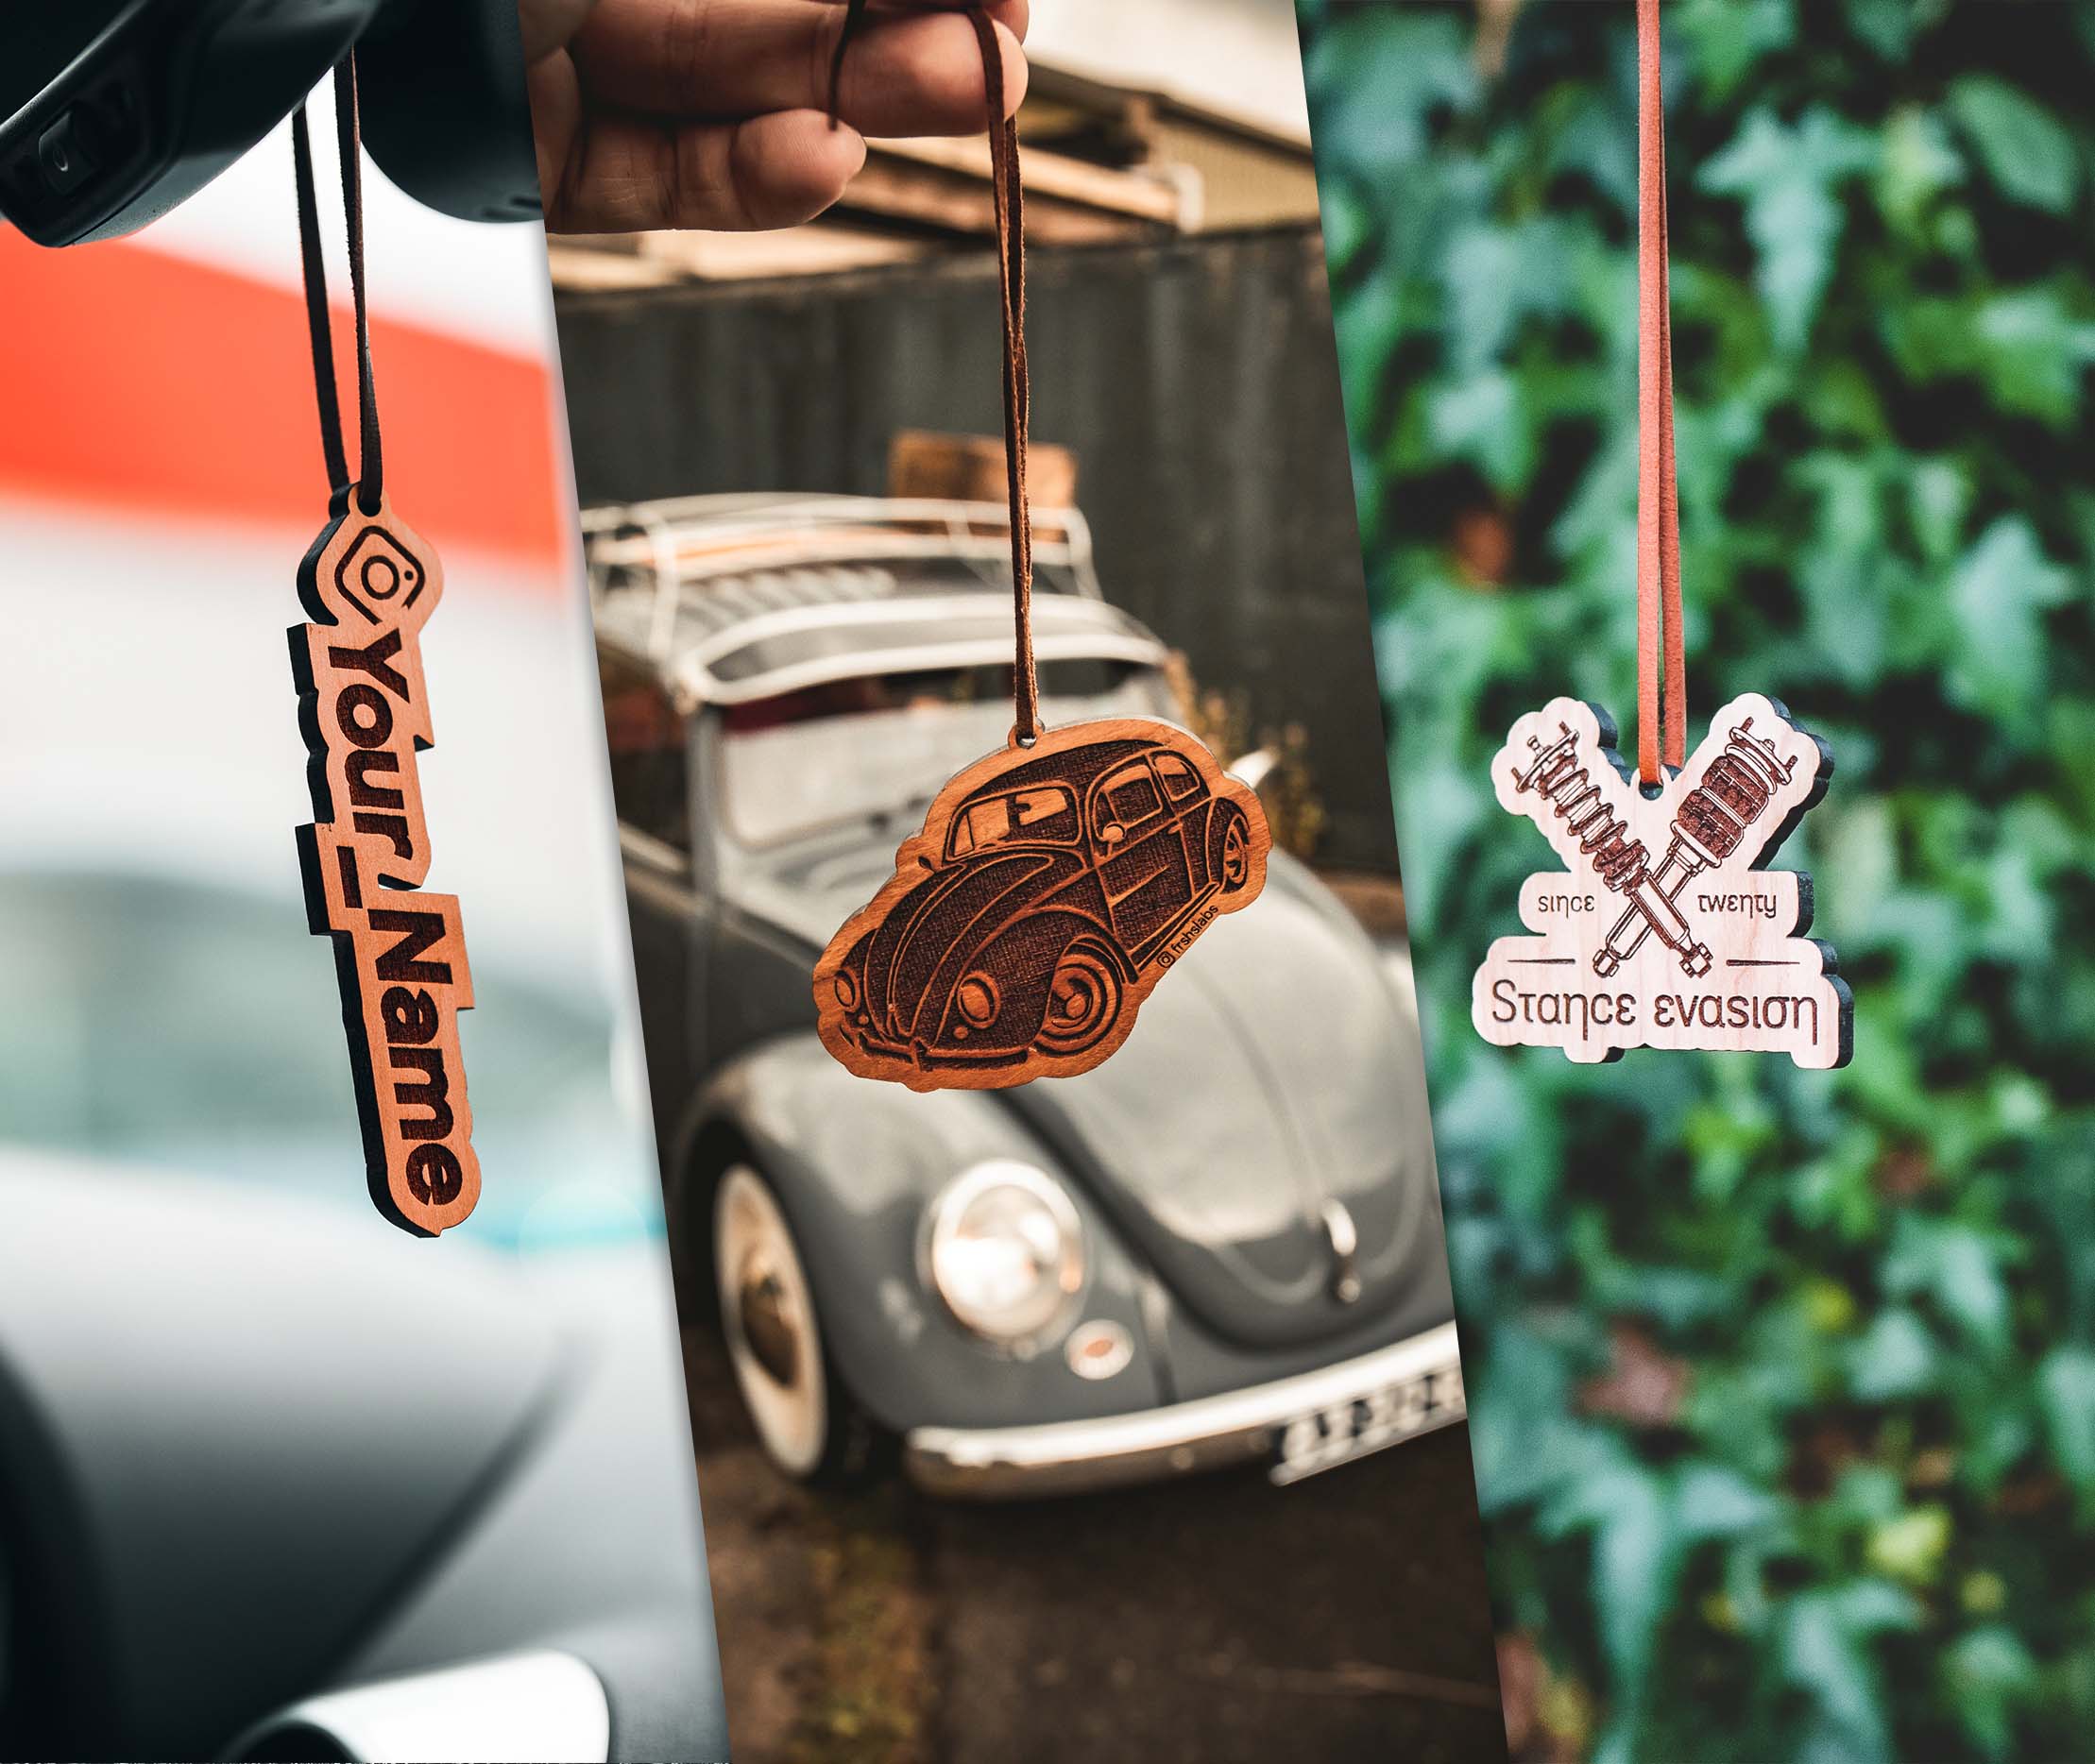 Custom made, re-scentable, premium wooden air fresheners by Frshslabs!